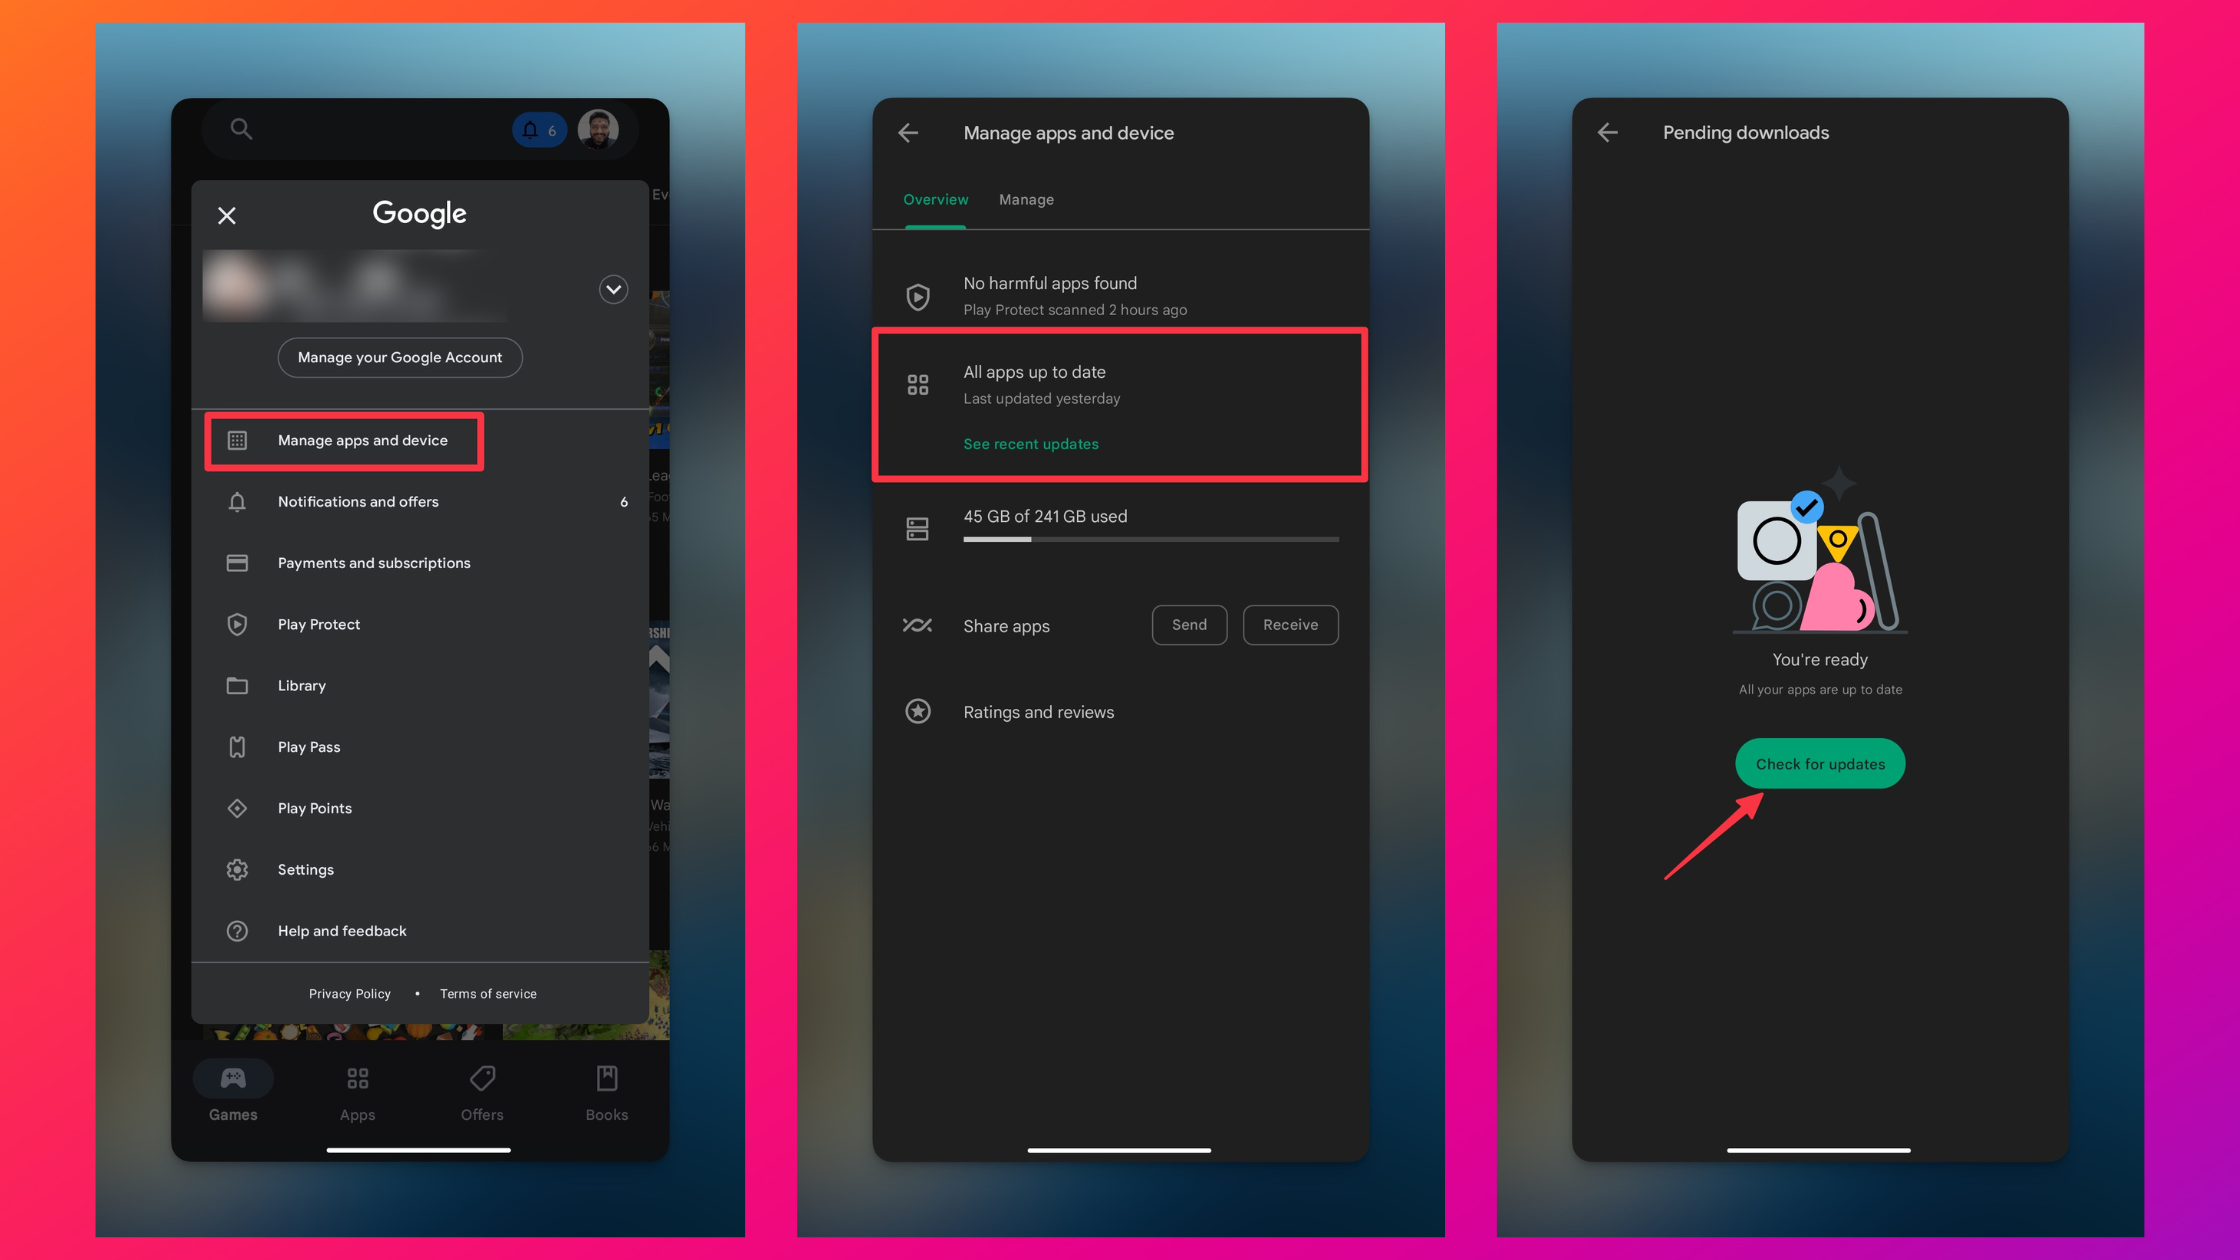 Remote.tools show how to update apps to latest version on Android